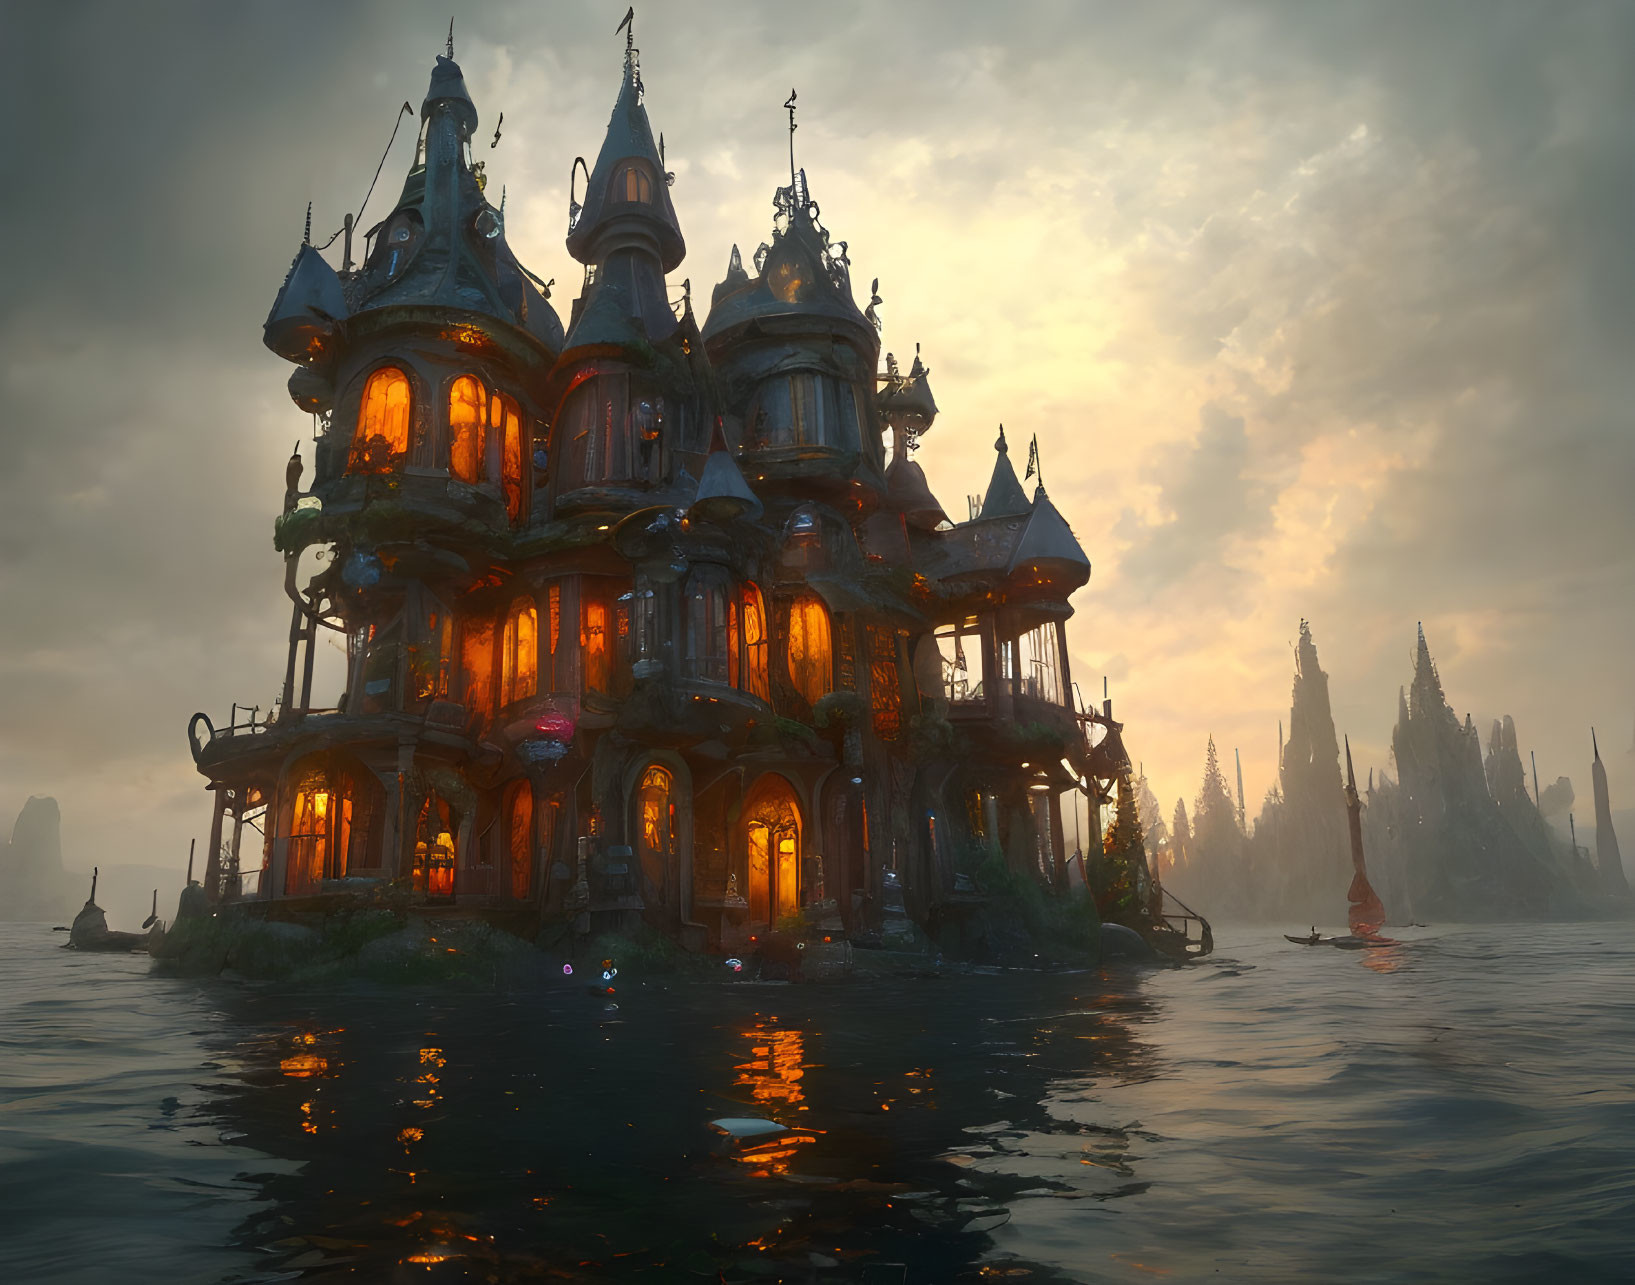 Fantasy mansion surrounded by water at dusk with glowing windows.